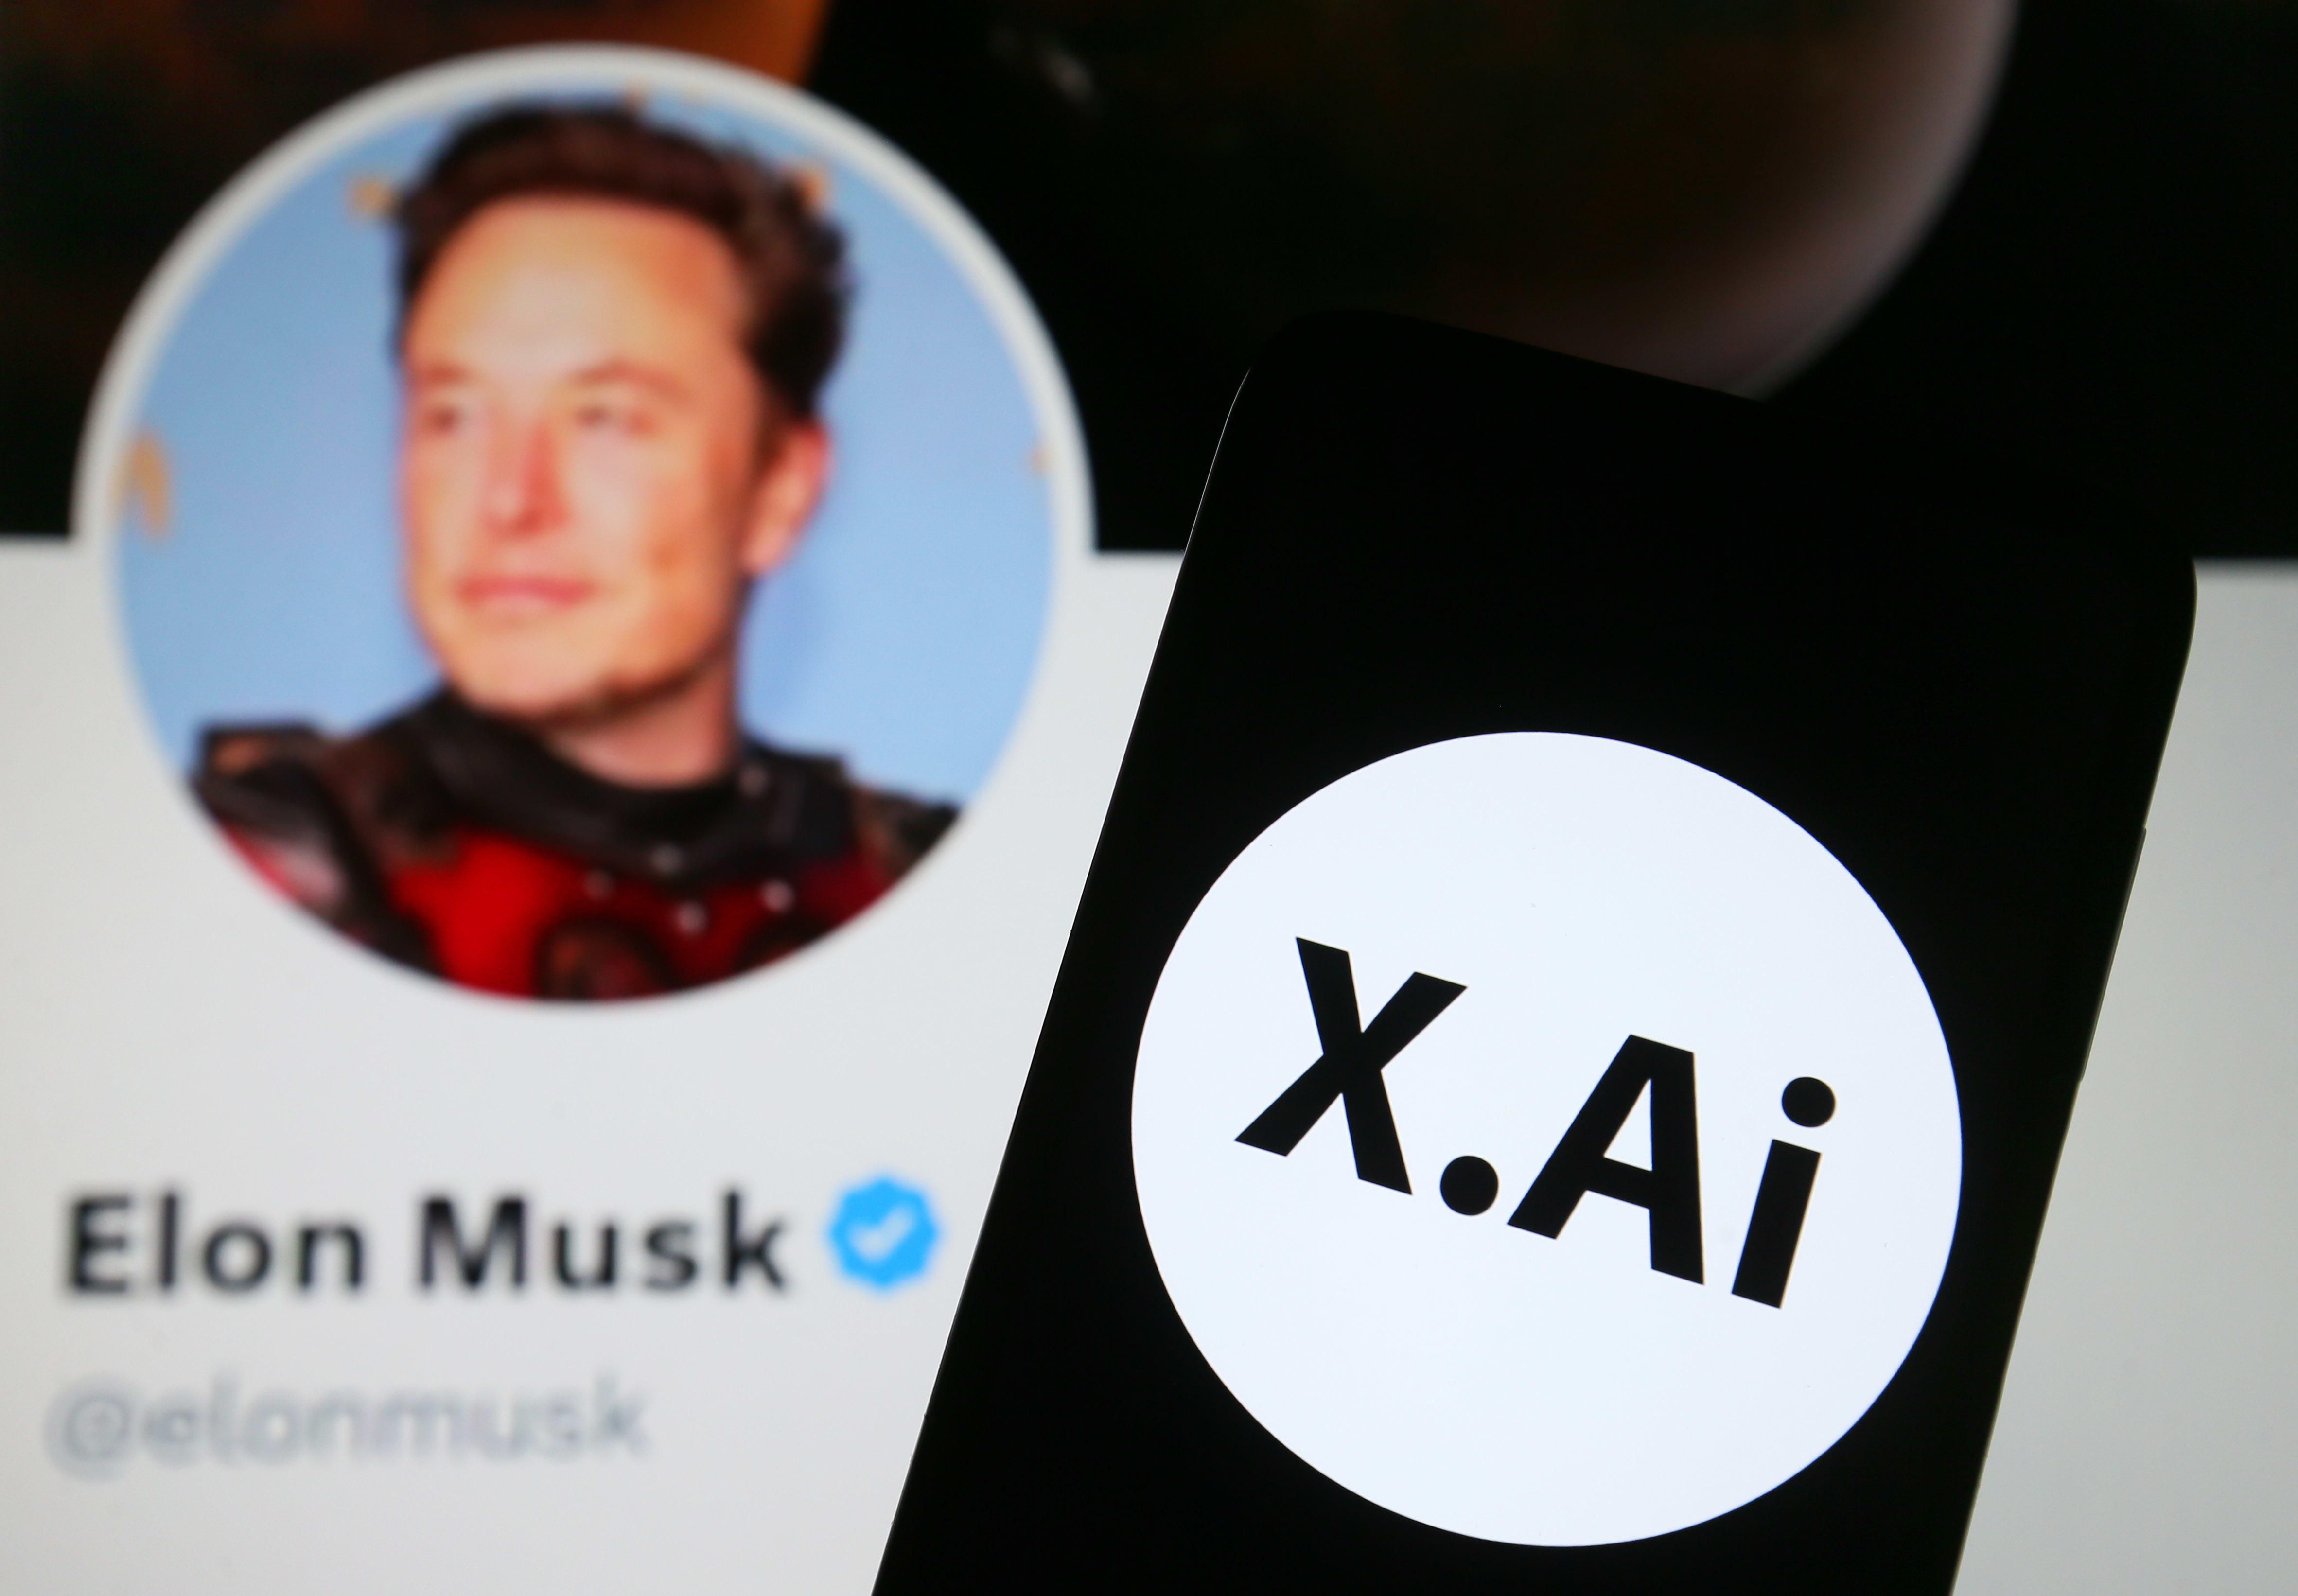 Musk Is Back In The Headlines After Threatening To Sue Microsoft For Using Twitter Data Without Authorization.